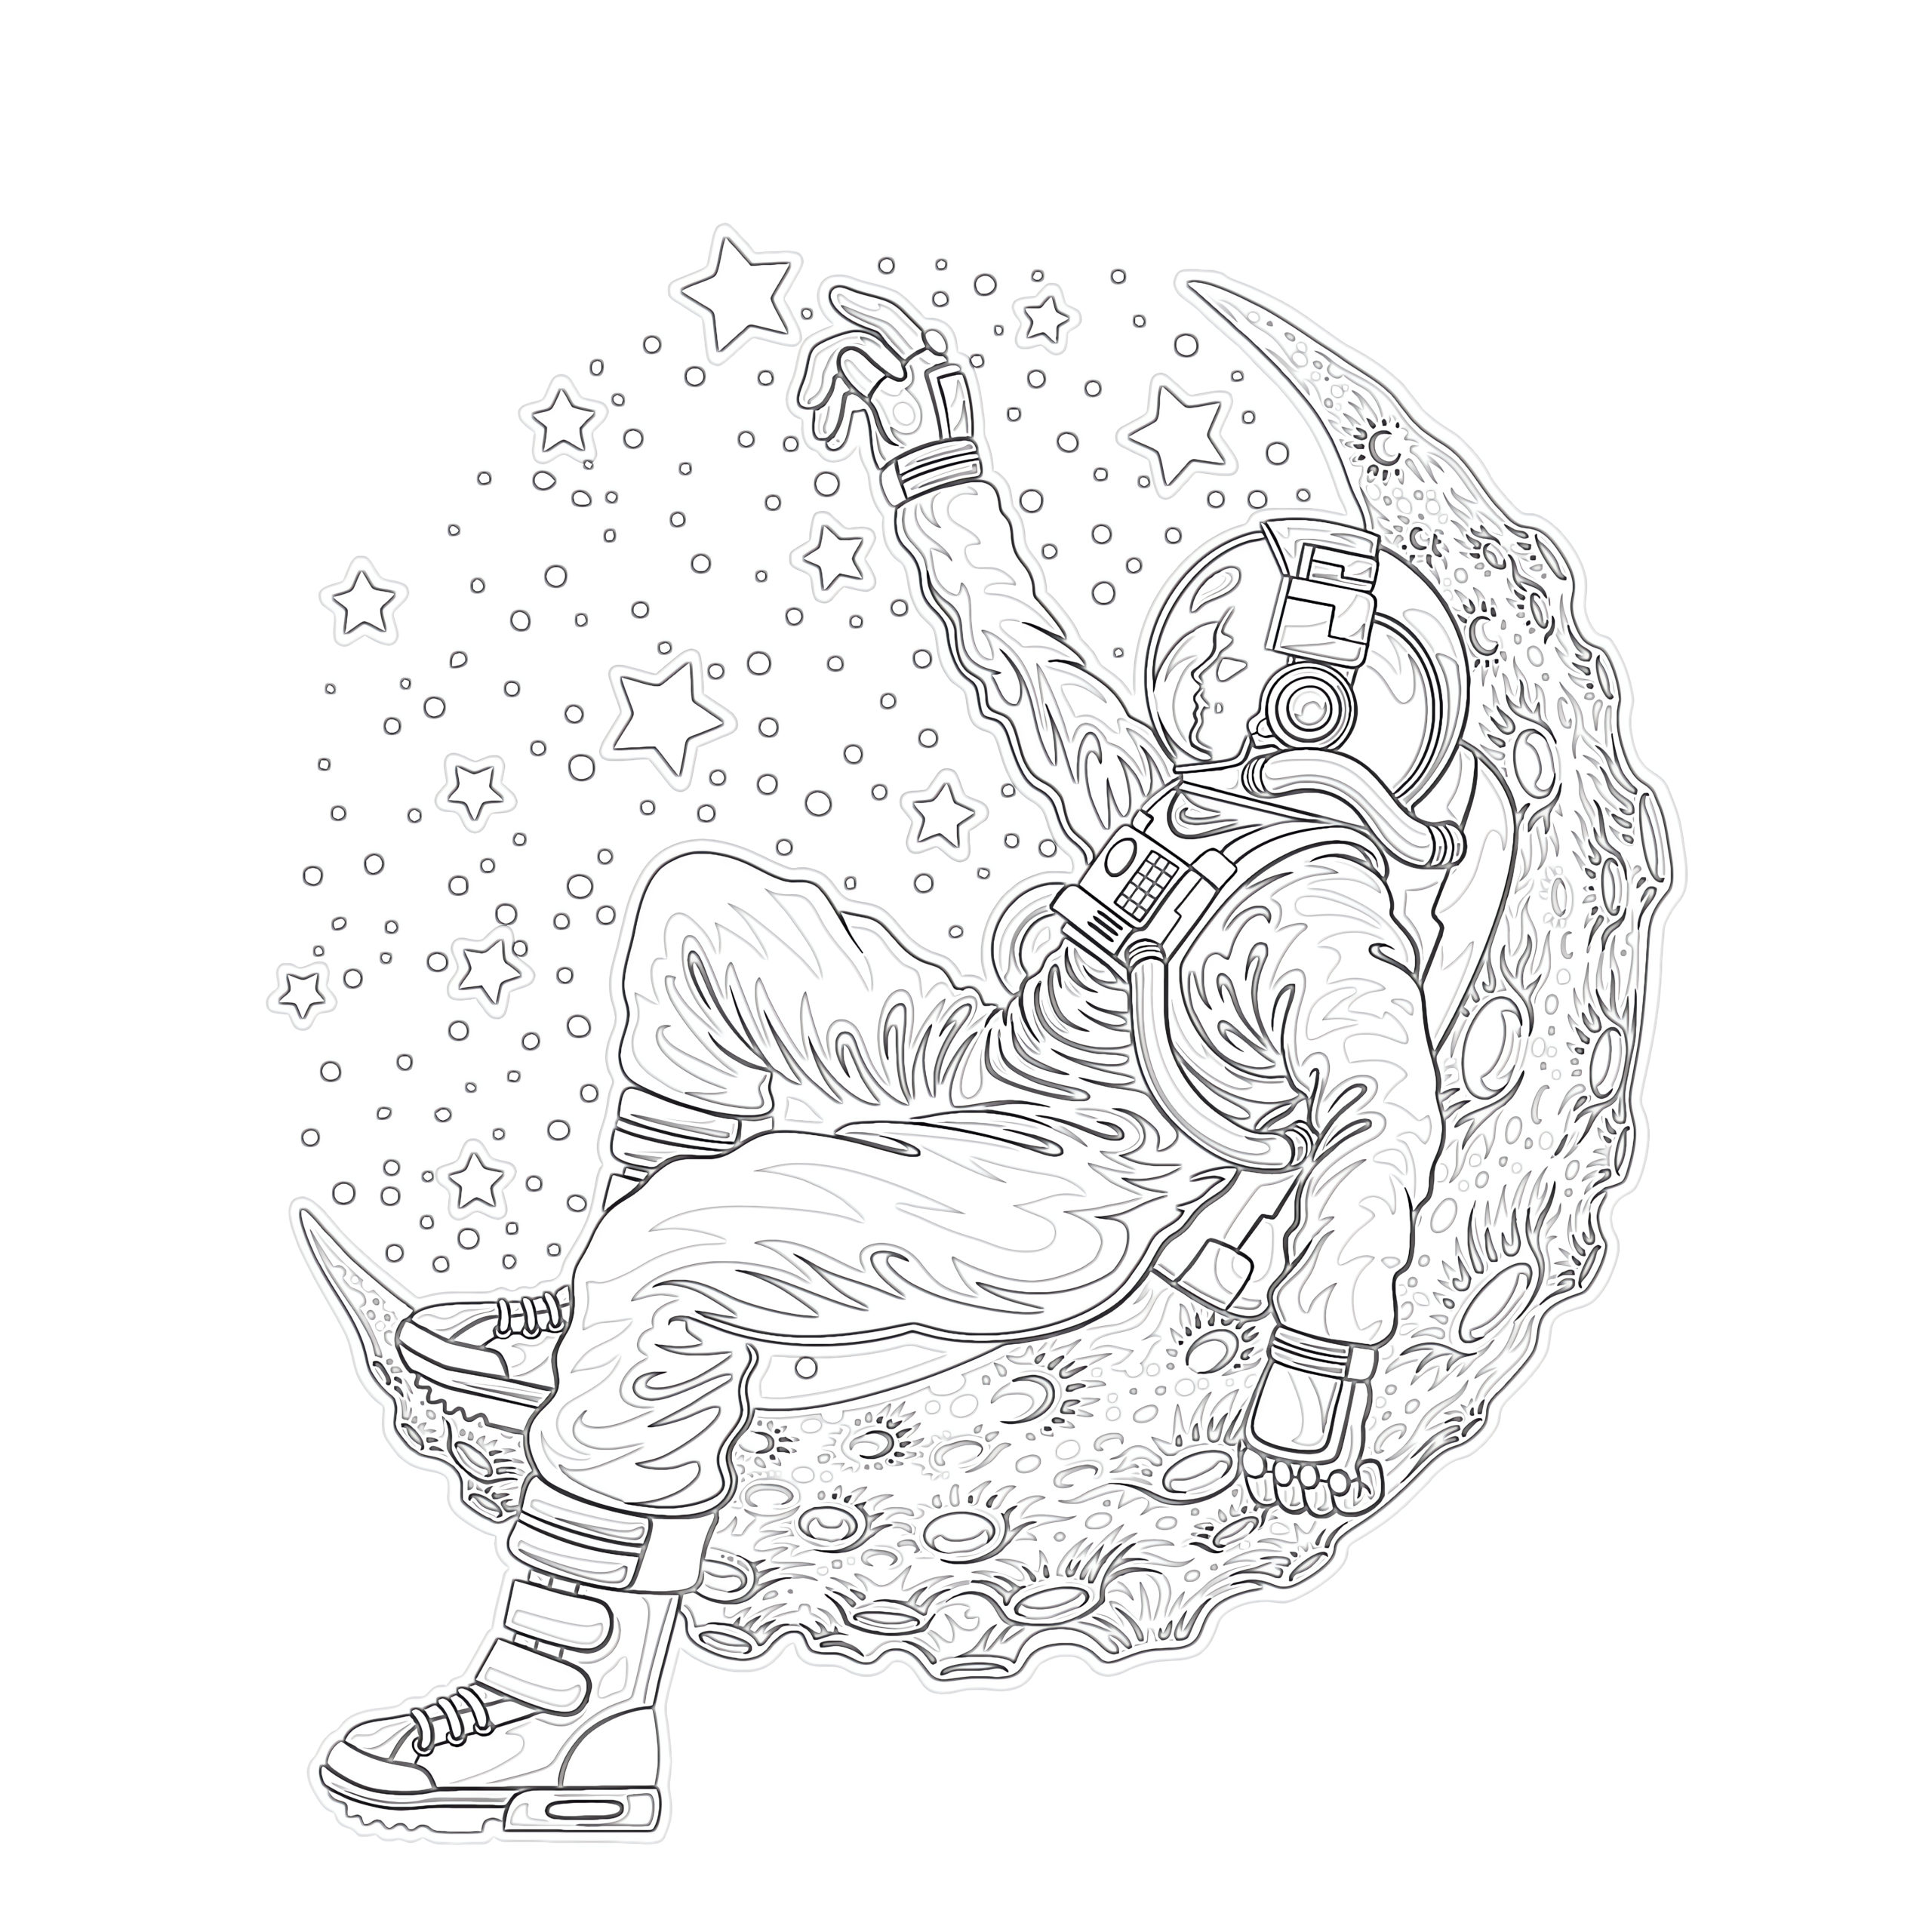 Astronaut Lying On The Moon coloring page - Mimi Panda